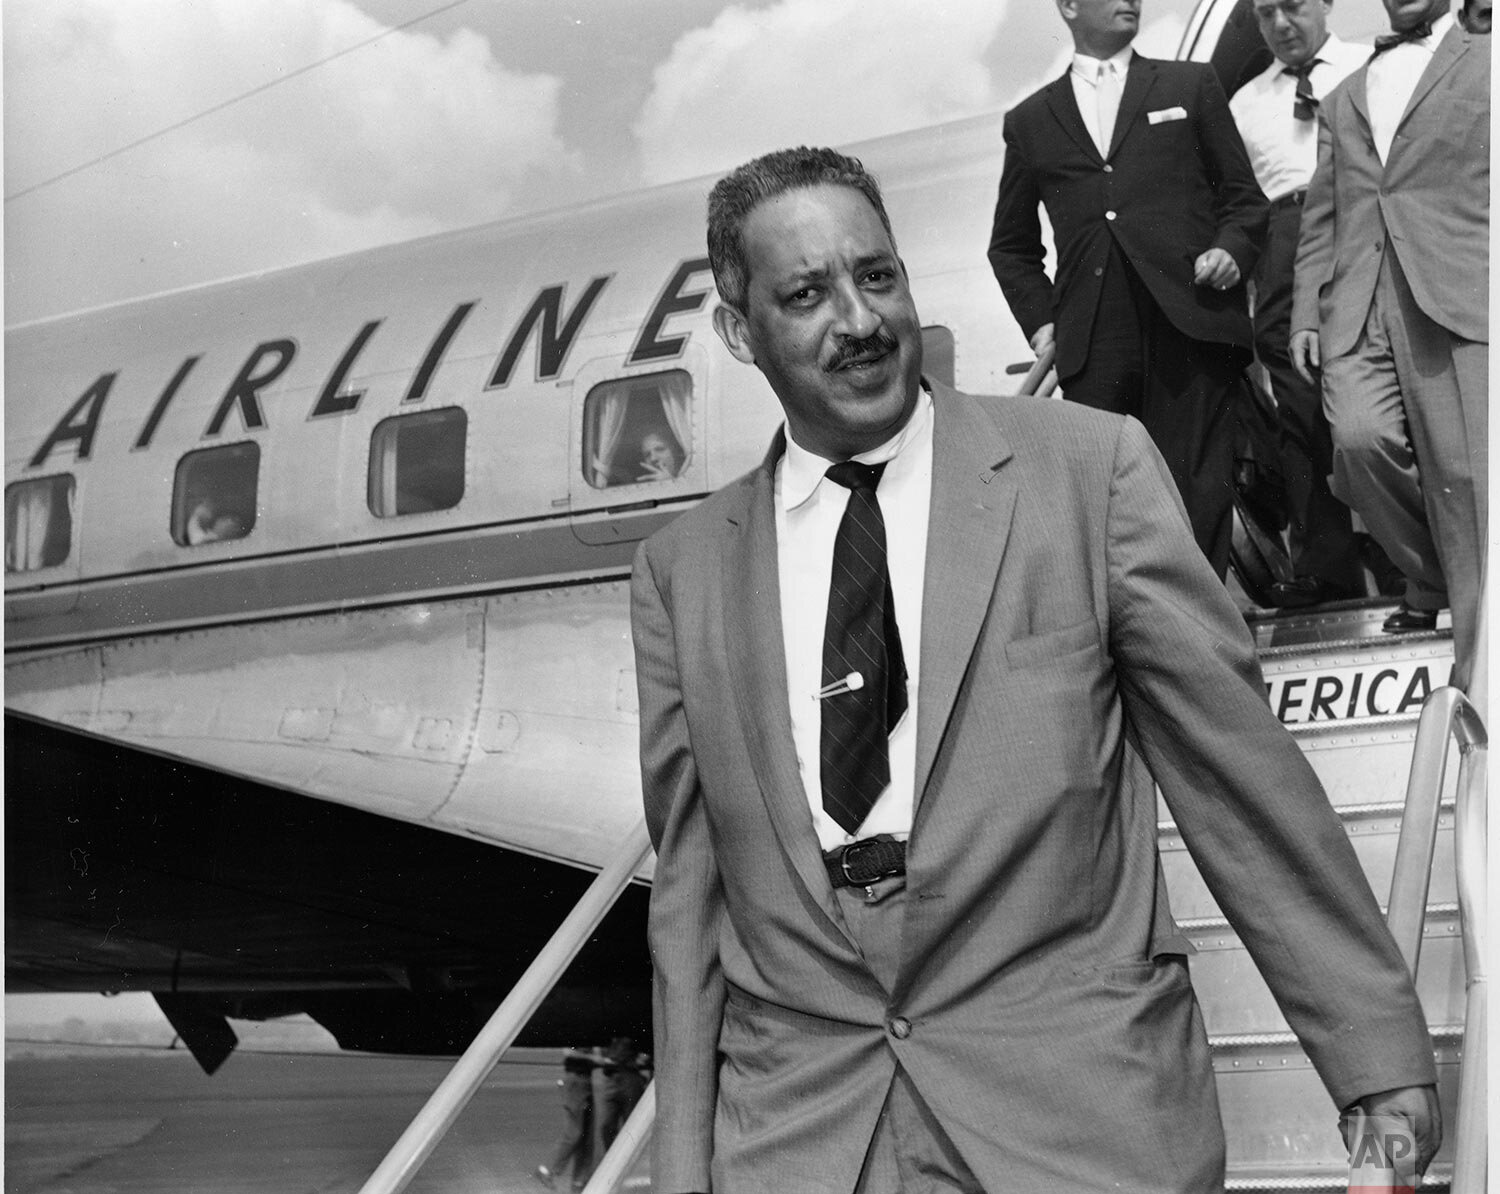  Thurgood Marshall, attorney for the National Association for the Advancement of Colored People, or NAACP, arrives at National Airport in Washington, August 22, 1958, to file appeal with the Supreme Court in the integration case of Central High Schoo